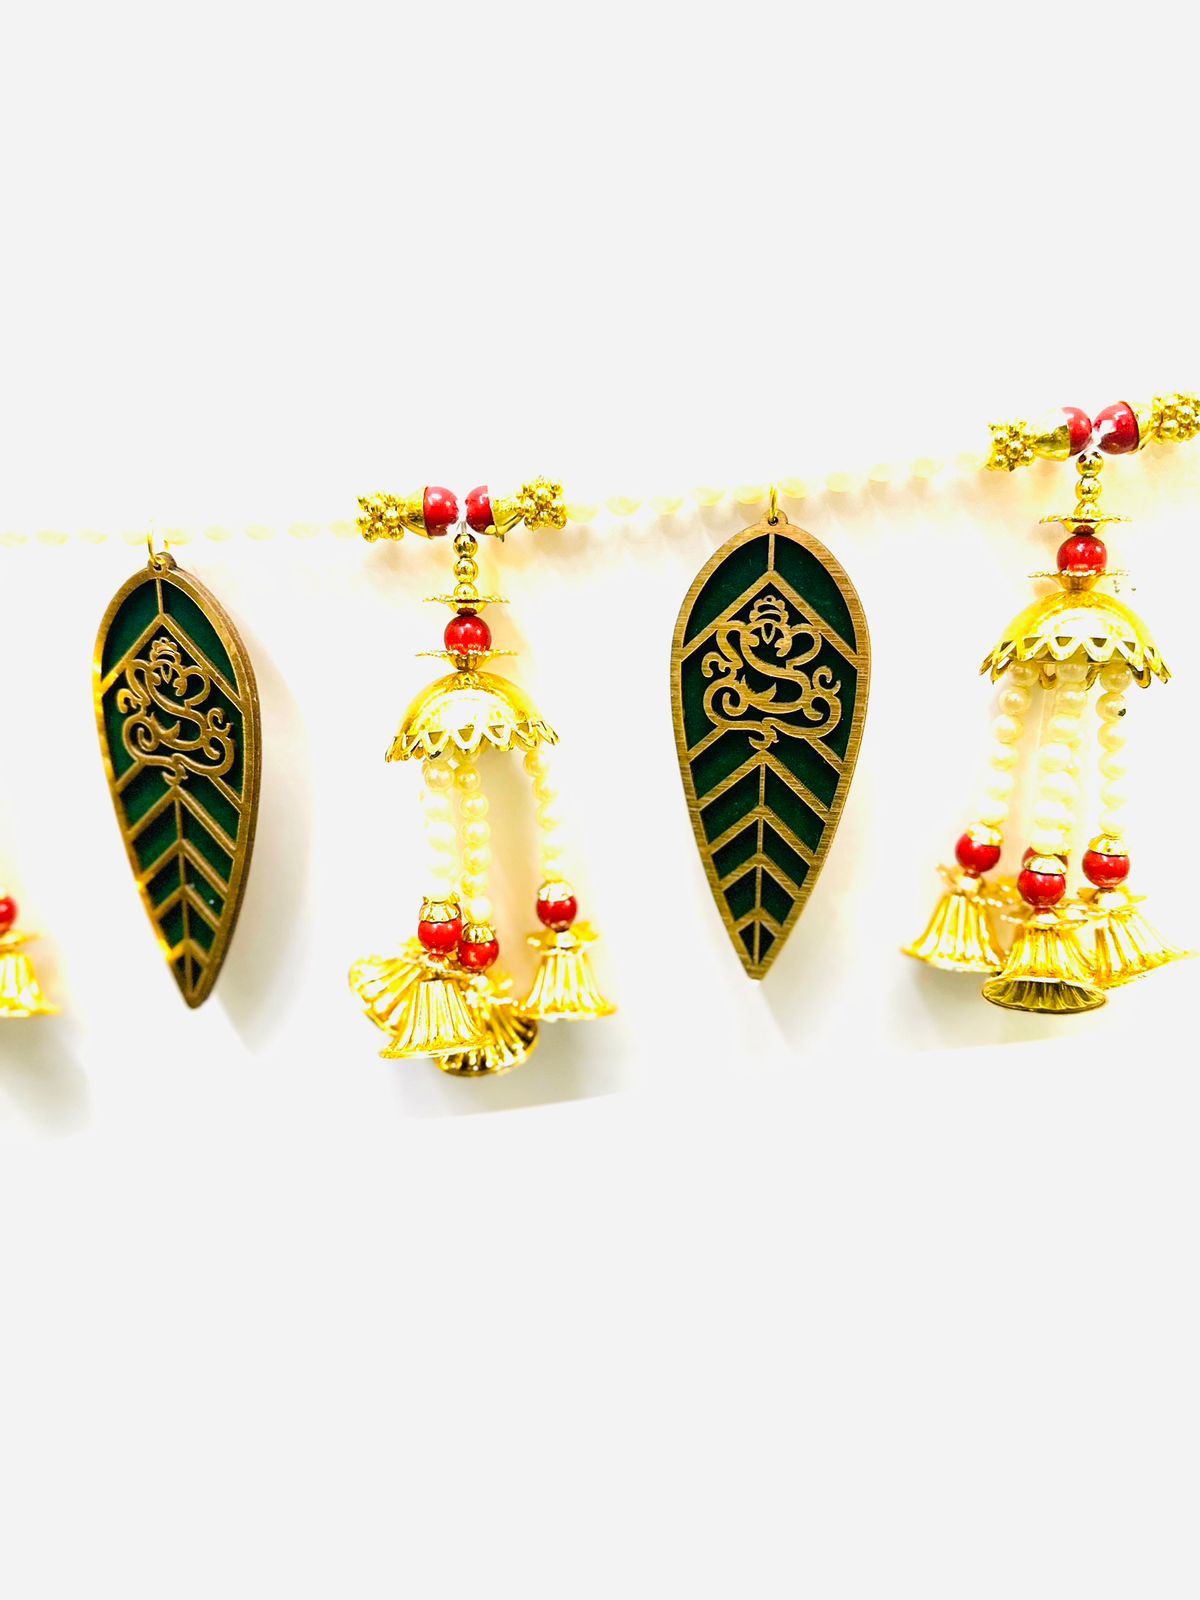 Traditional Hangings Toran Decoration For Home Office Exclusively From Tamrapatra